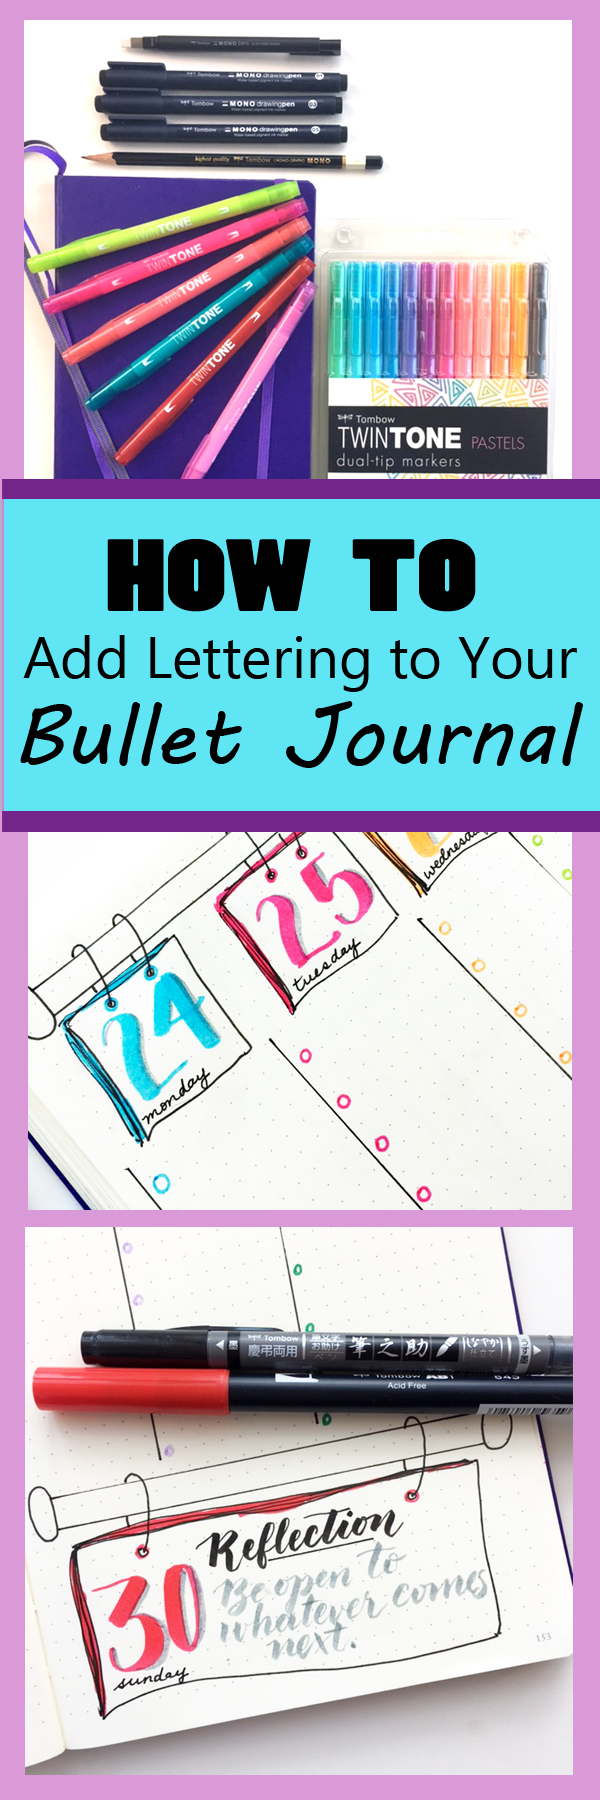 Awesome BUJO ideas and video tutorials for lettering with Tombow pens! www.kellycreates.ca